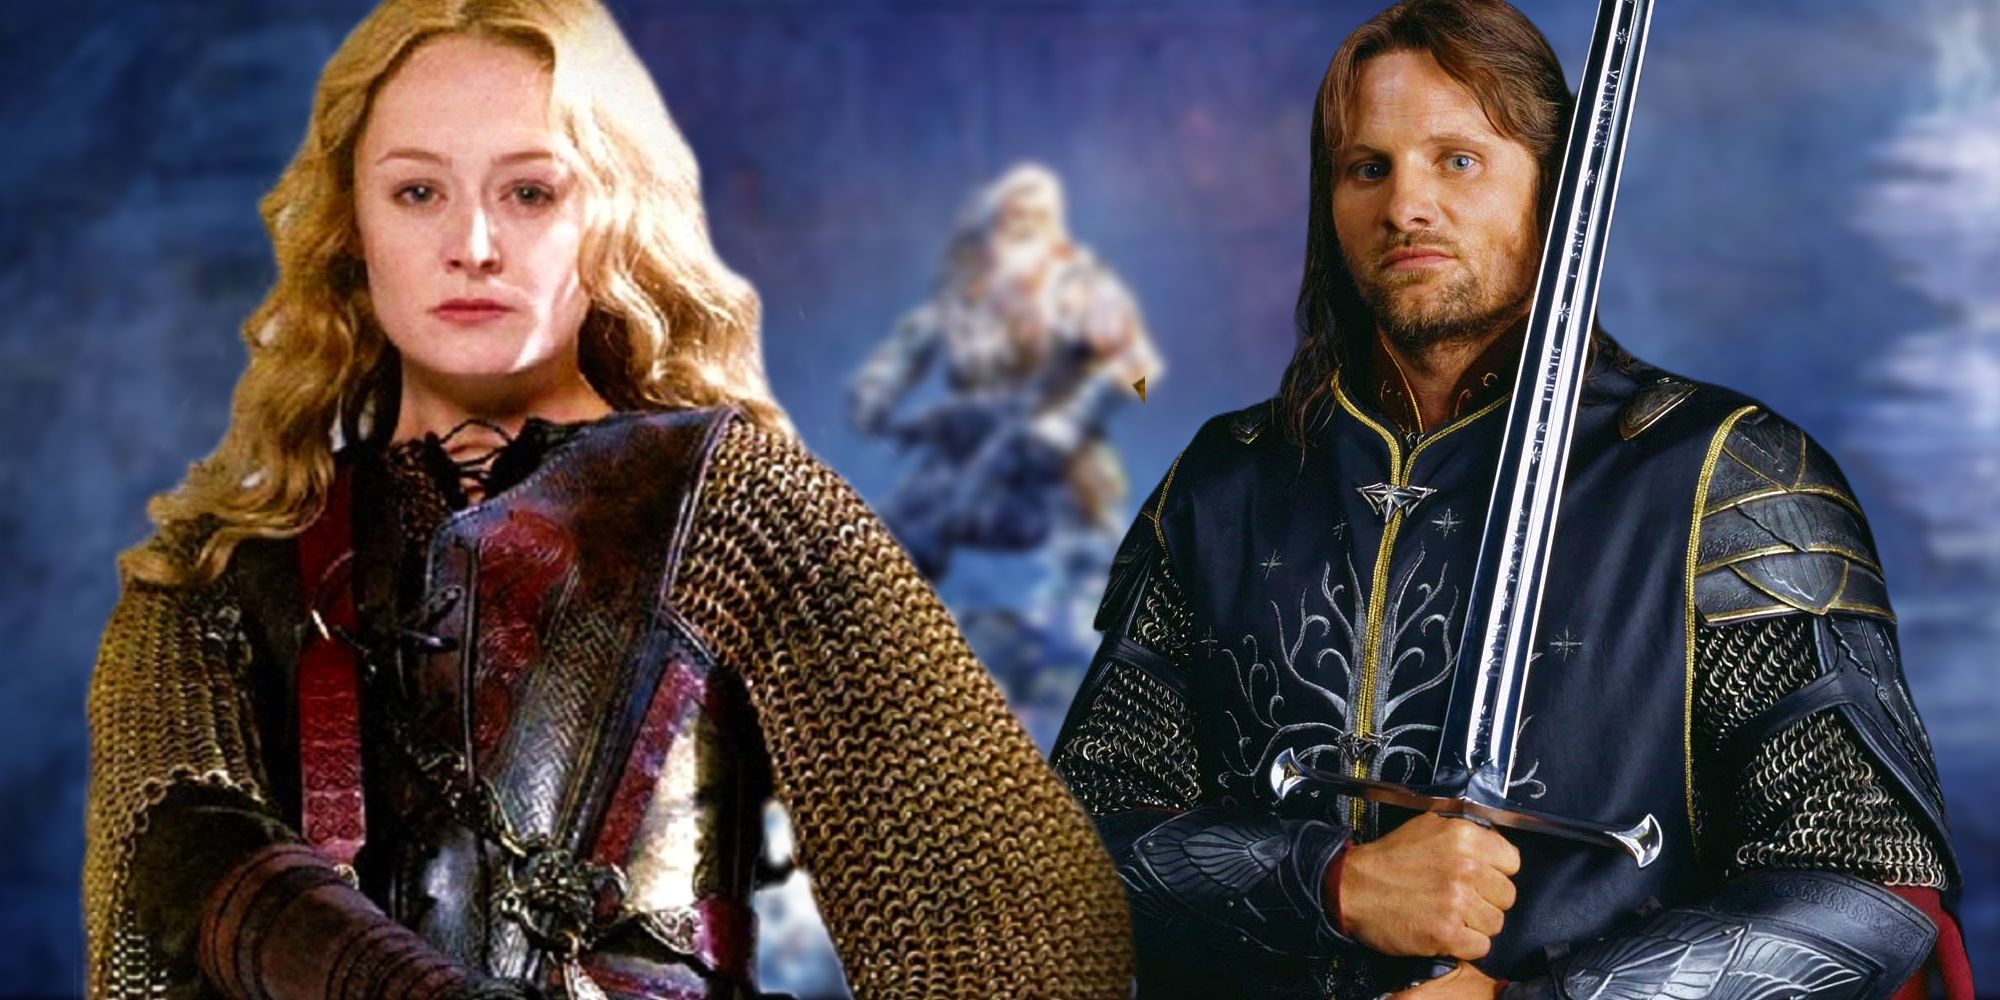 Viggo Mortensen as Aragorn and Miranda Otto Eowyn from Lord of the Rings either side of blurred artwork for the War of the Rohirrim